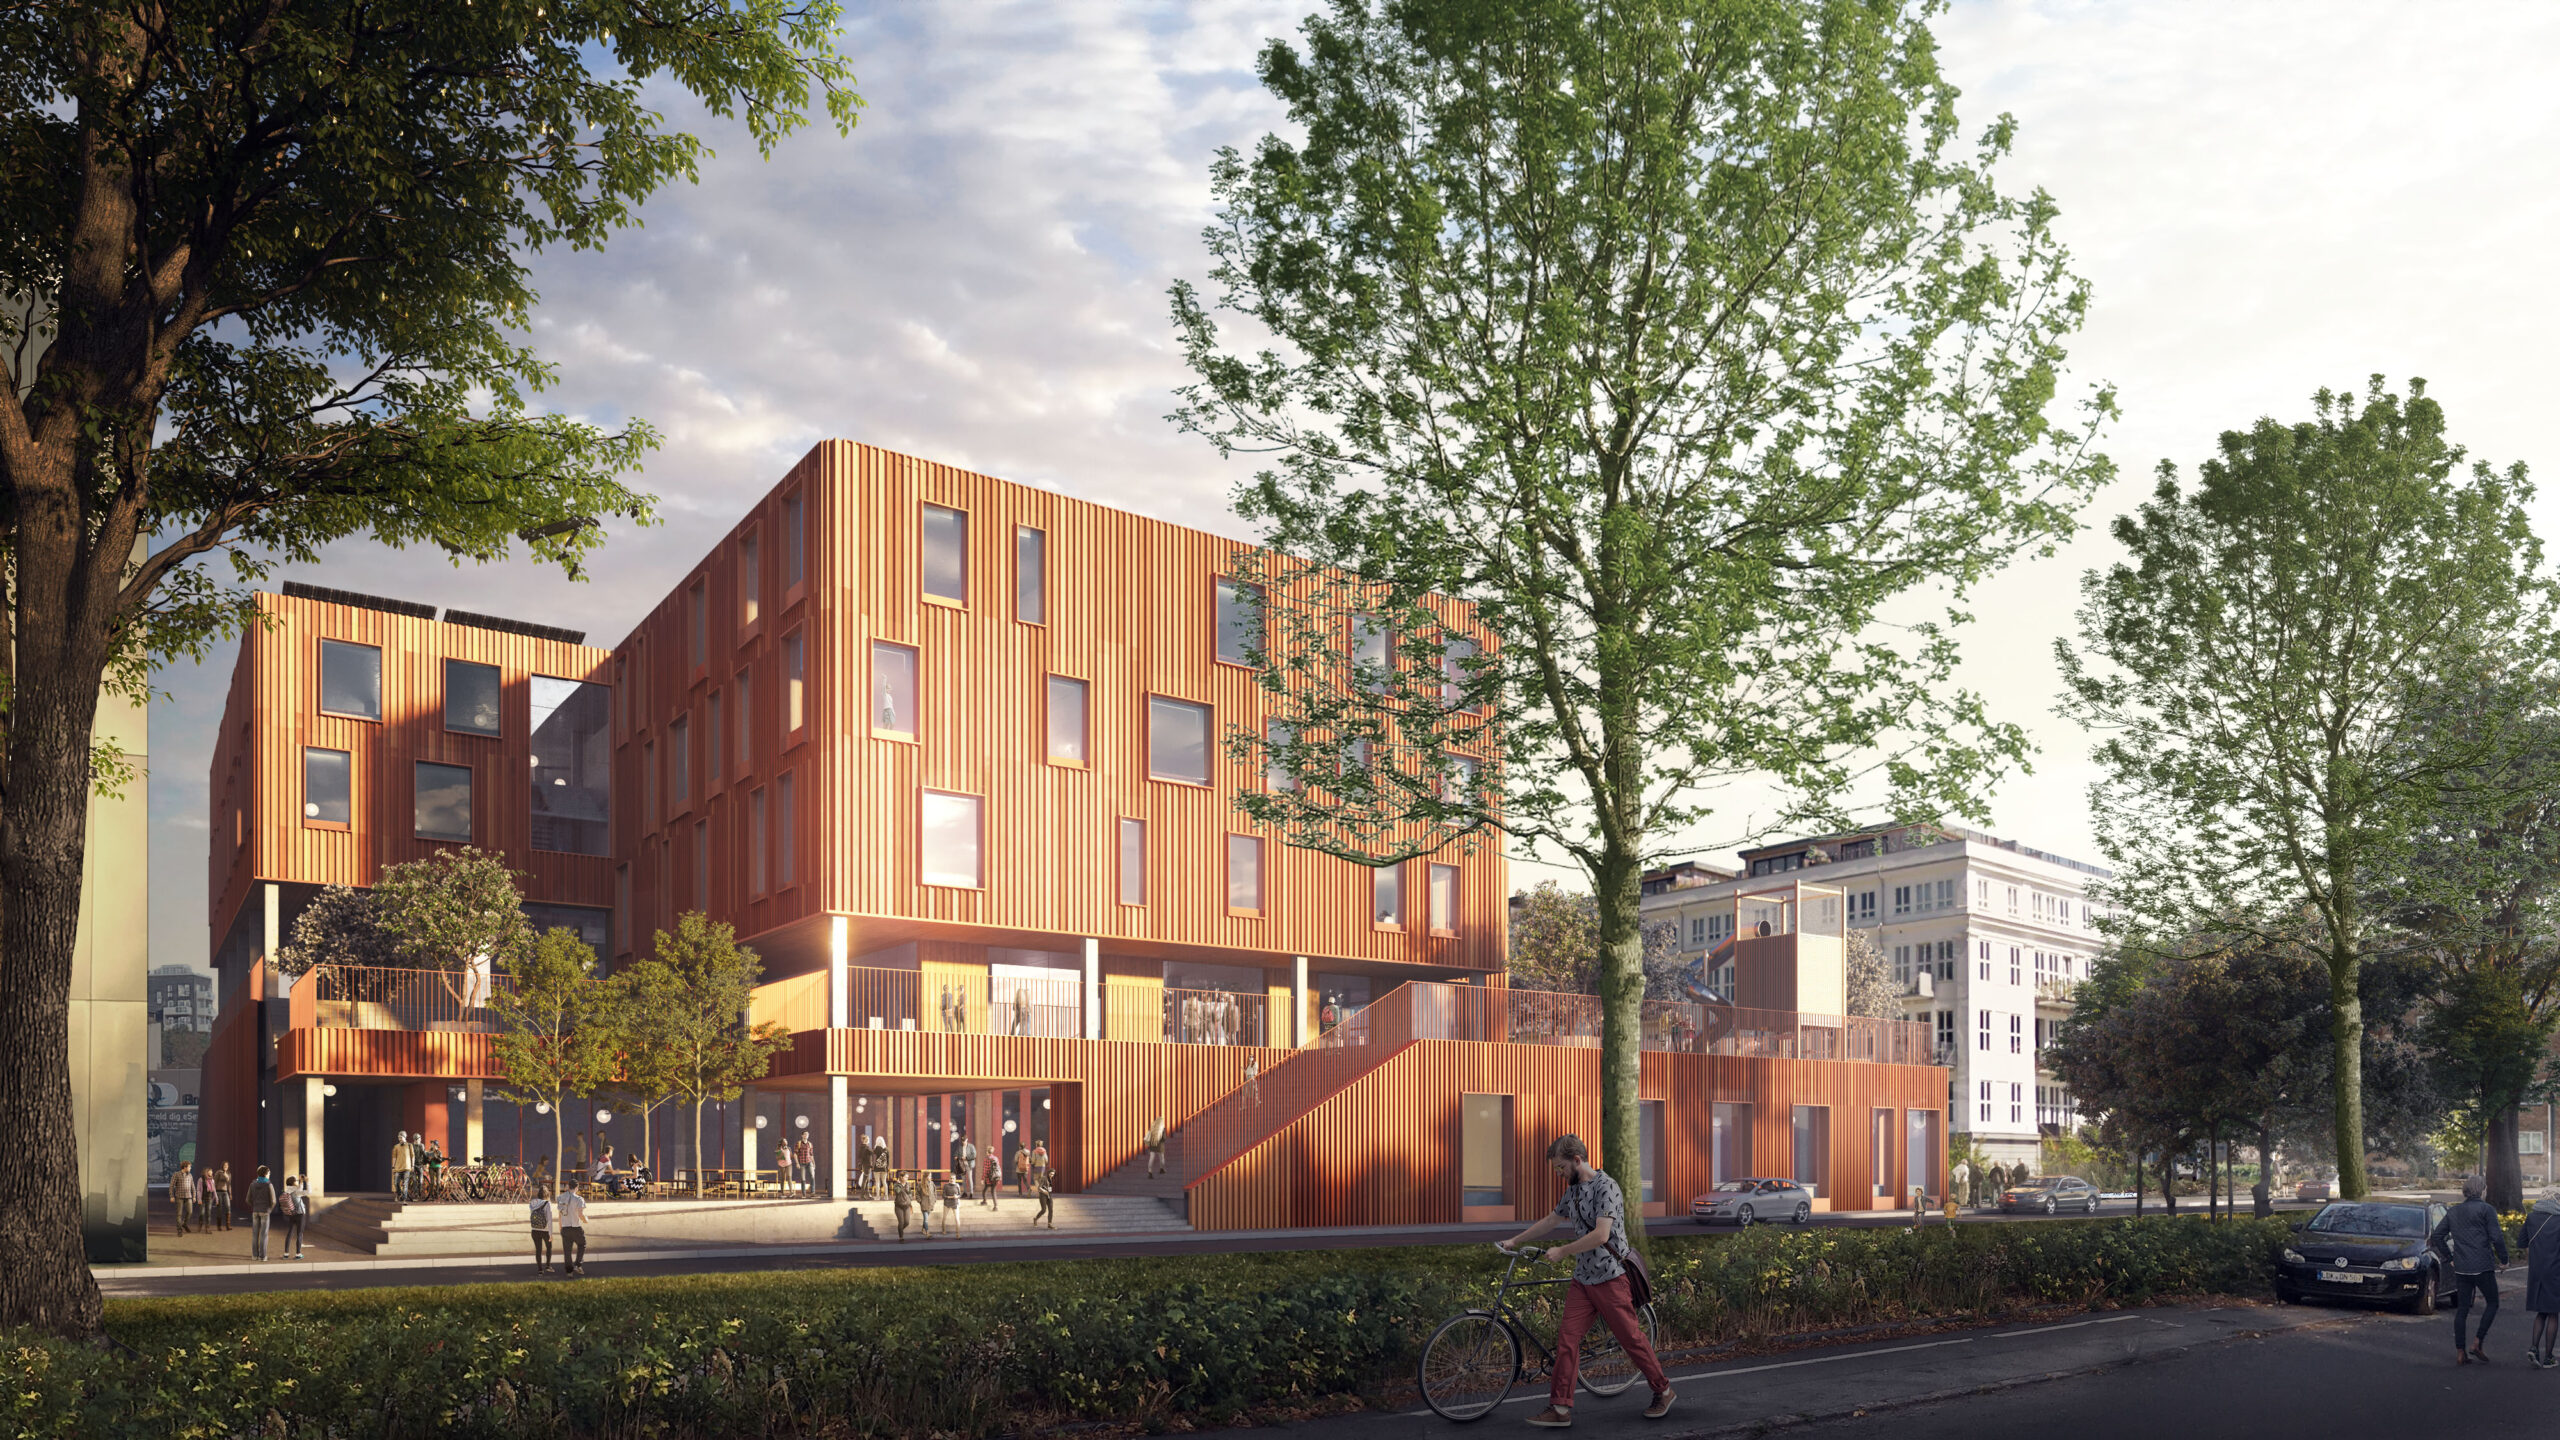 Aphoto-realistic render of the school's exterior, showcasing its playful facade with wooden cladding.